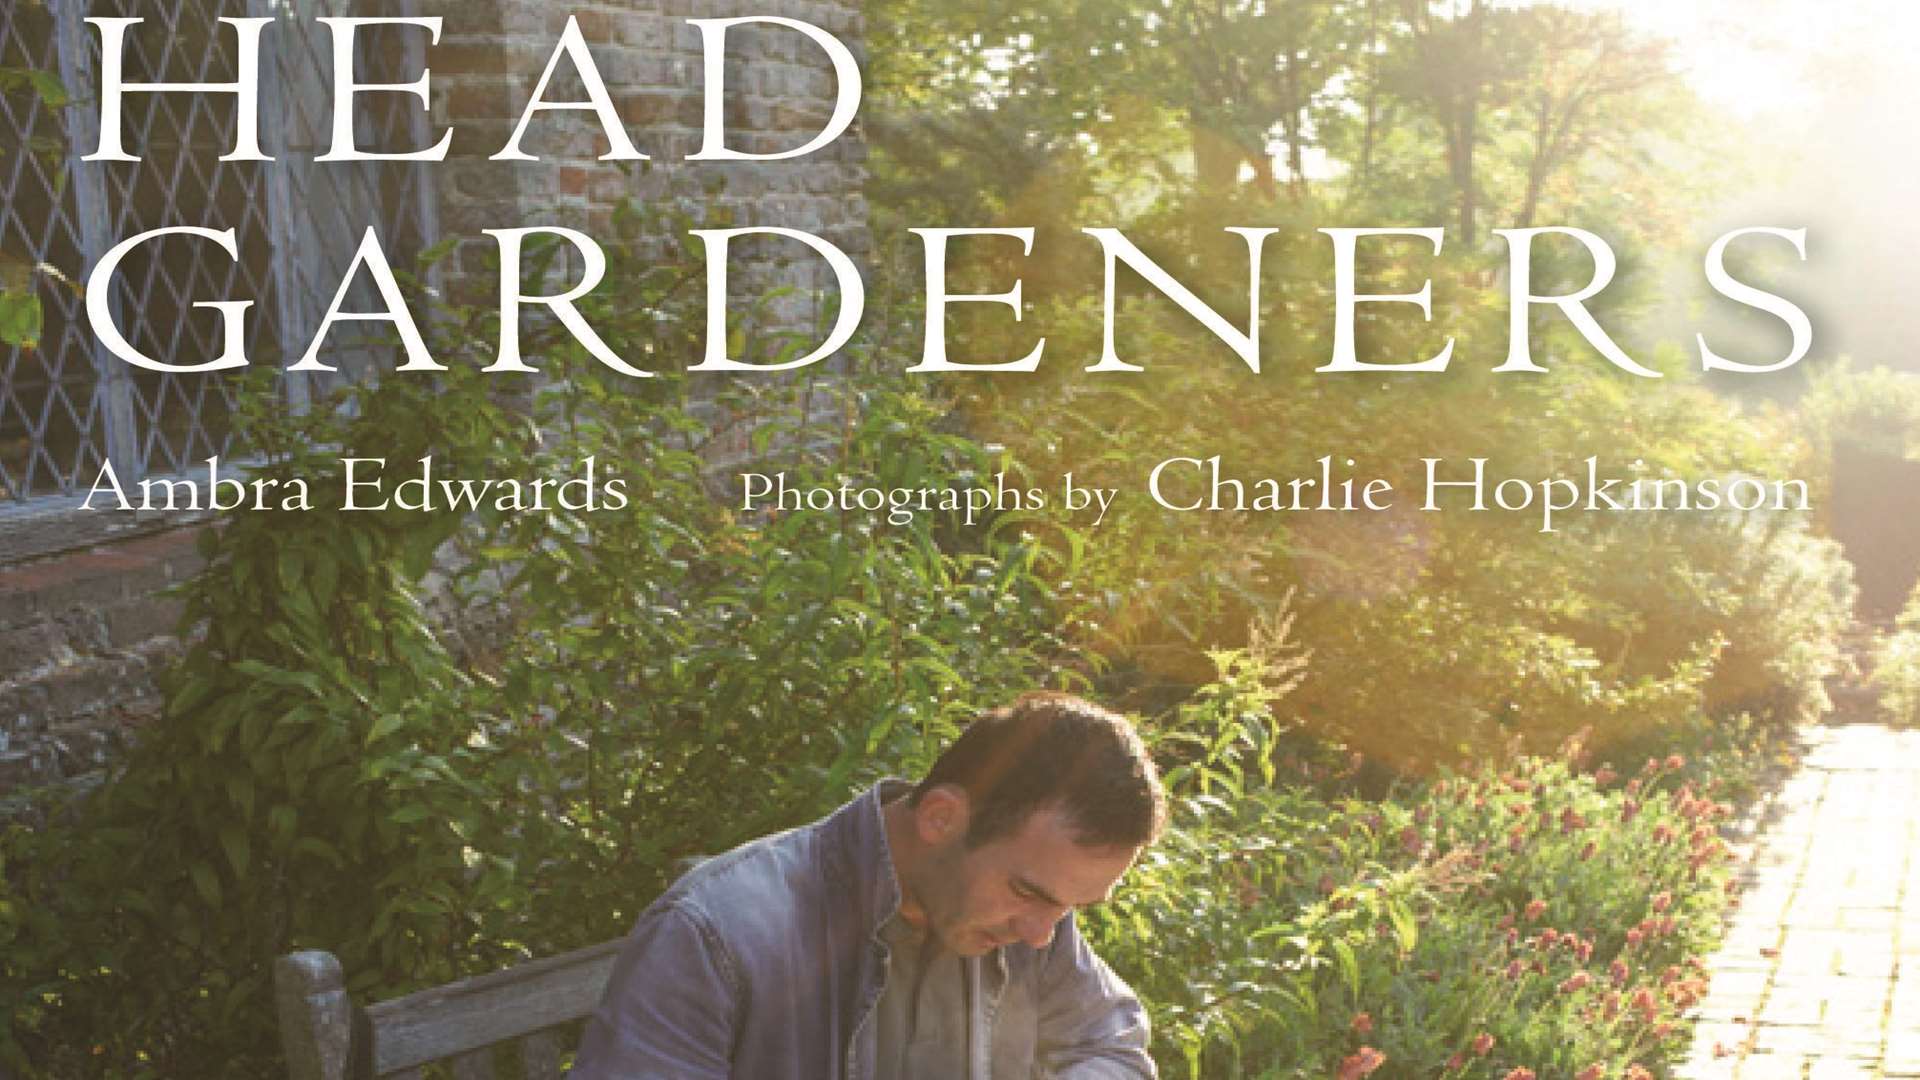 Head Gardeners by Ambra Edwards with photography by Charlie Hopkinson, features Sissinghurst on its cover